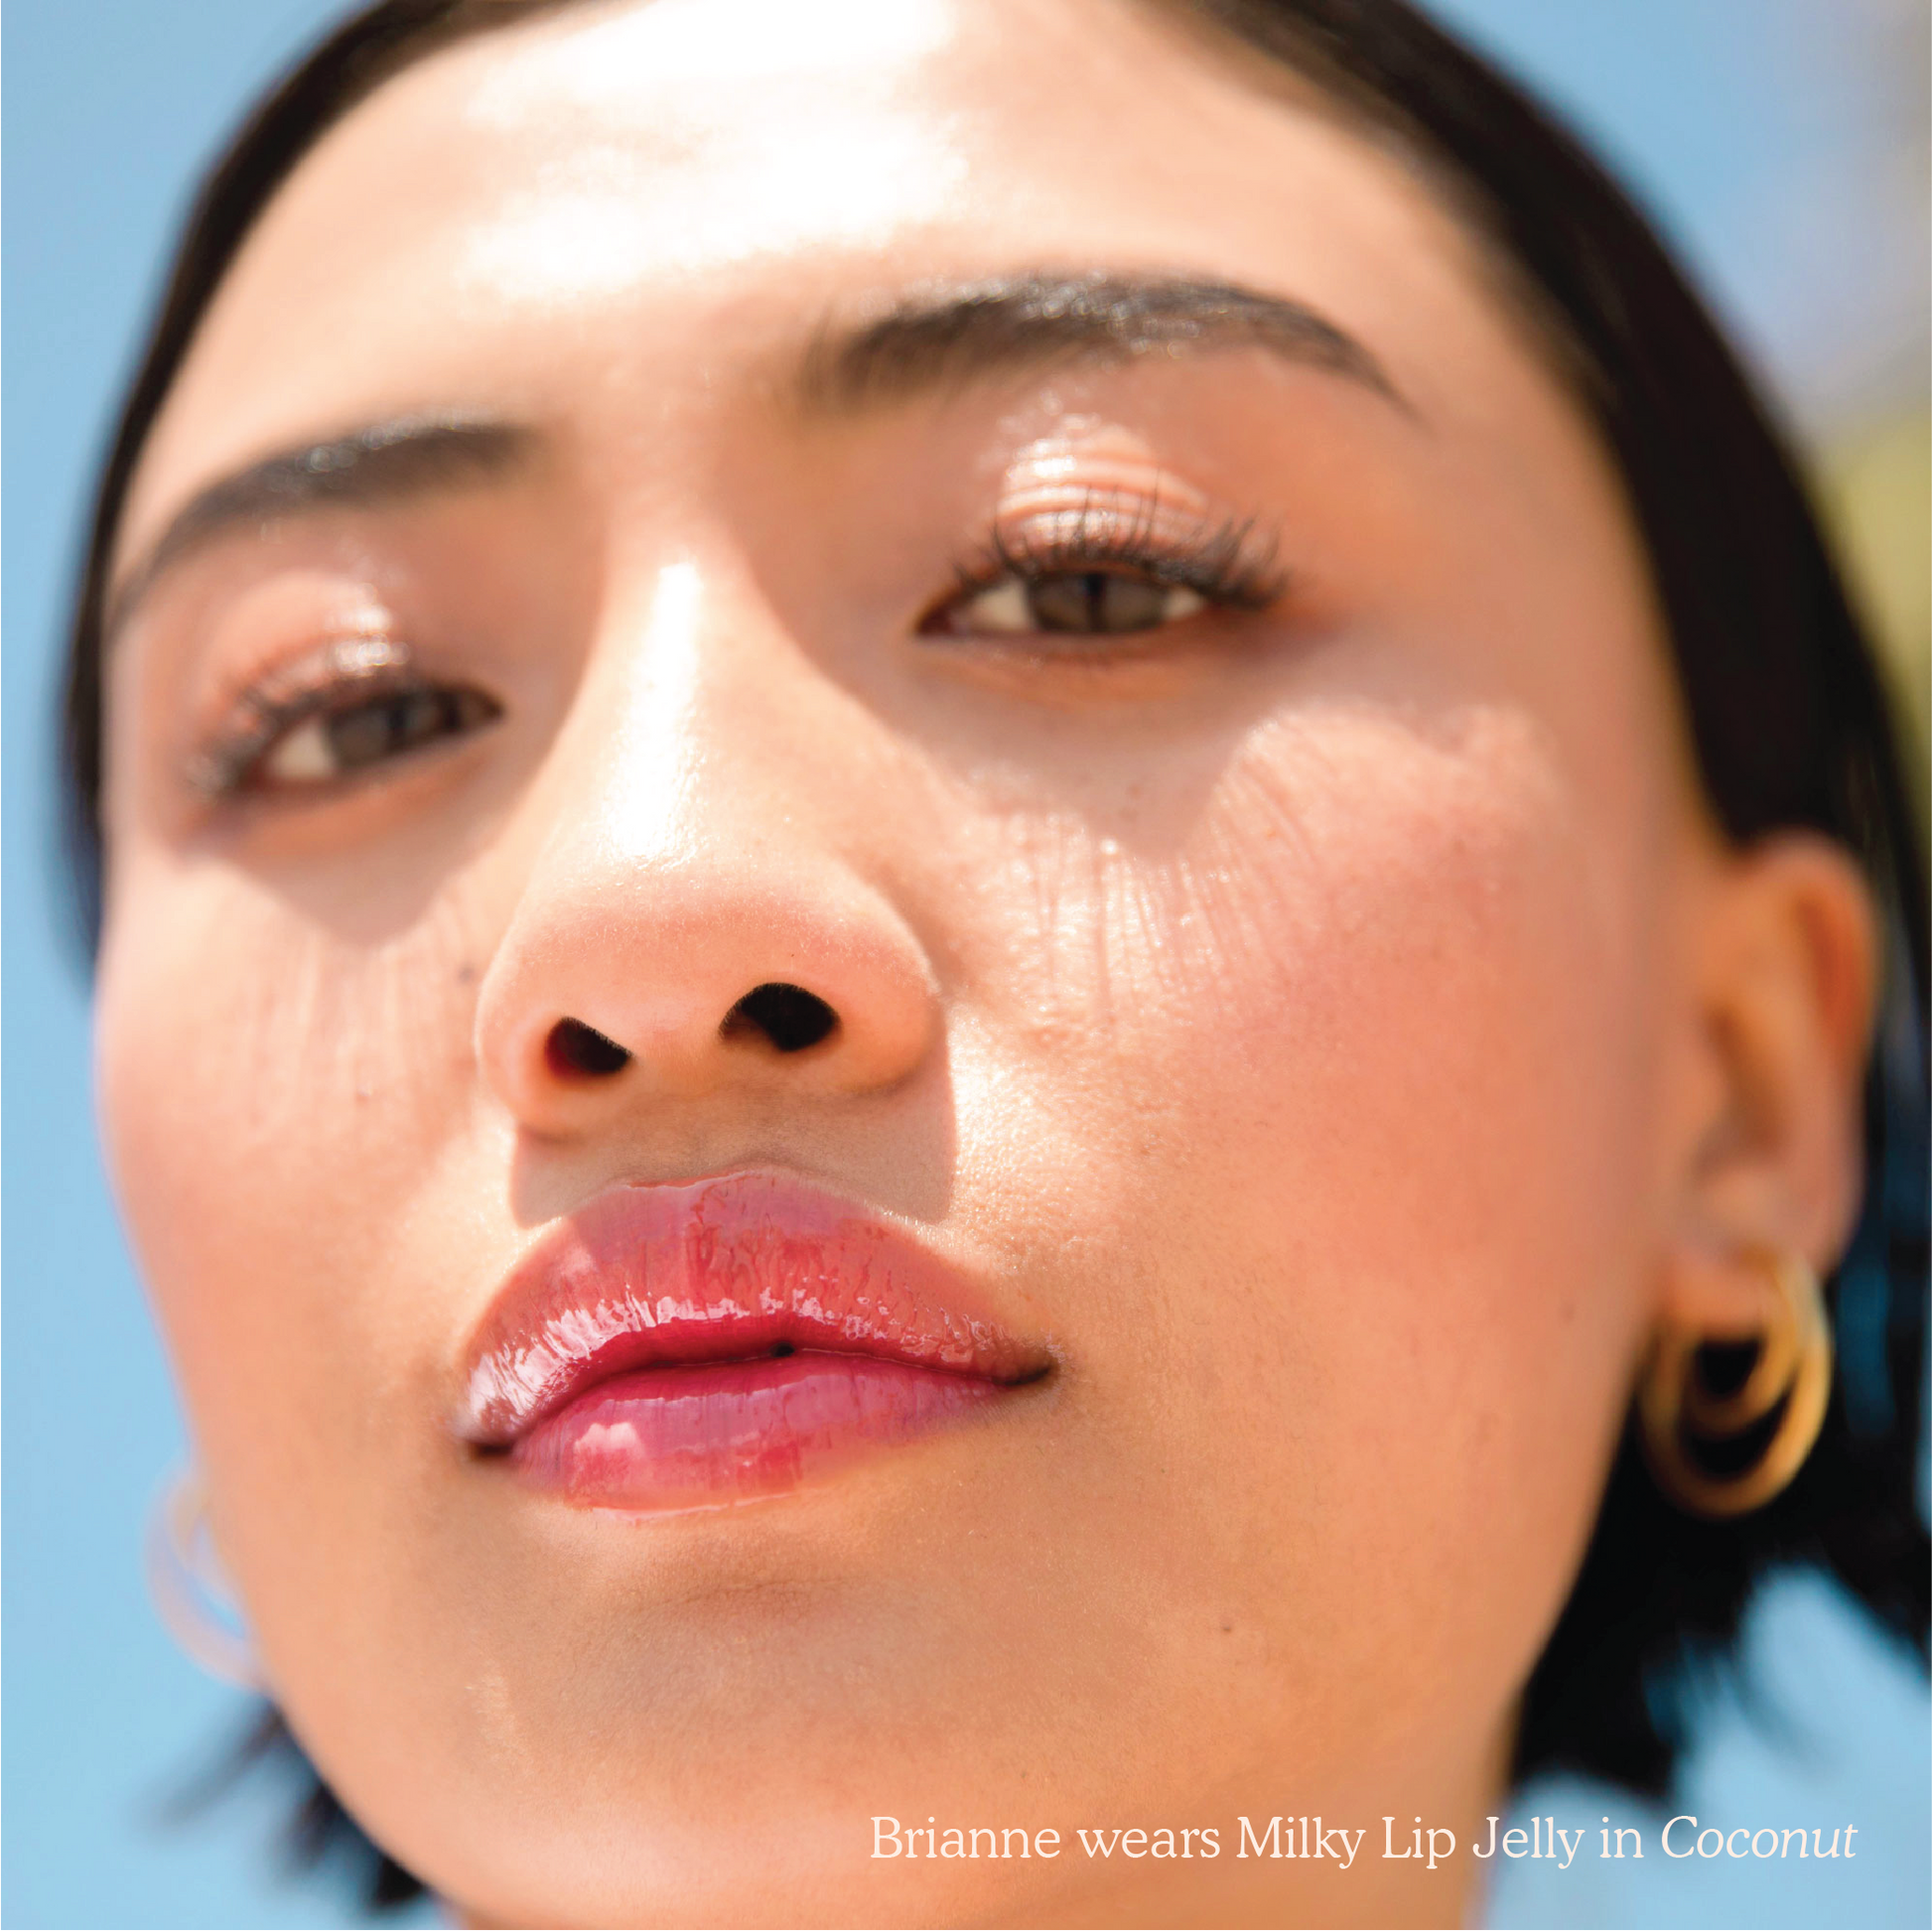 Closeup photo of a girl with very glossy lips, wearing the Tower 28 Beauty ShineOn Milky Lip Jelly shade in Coconut (a milky mauve-pink)